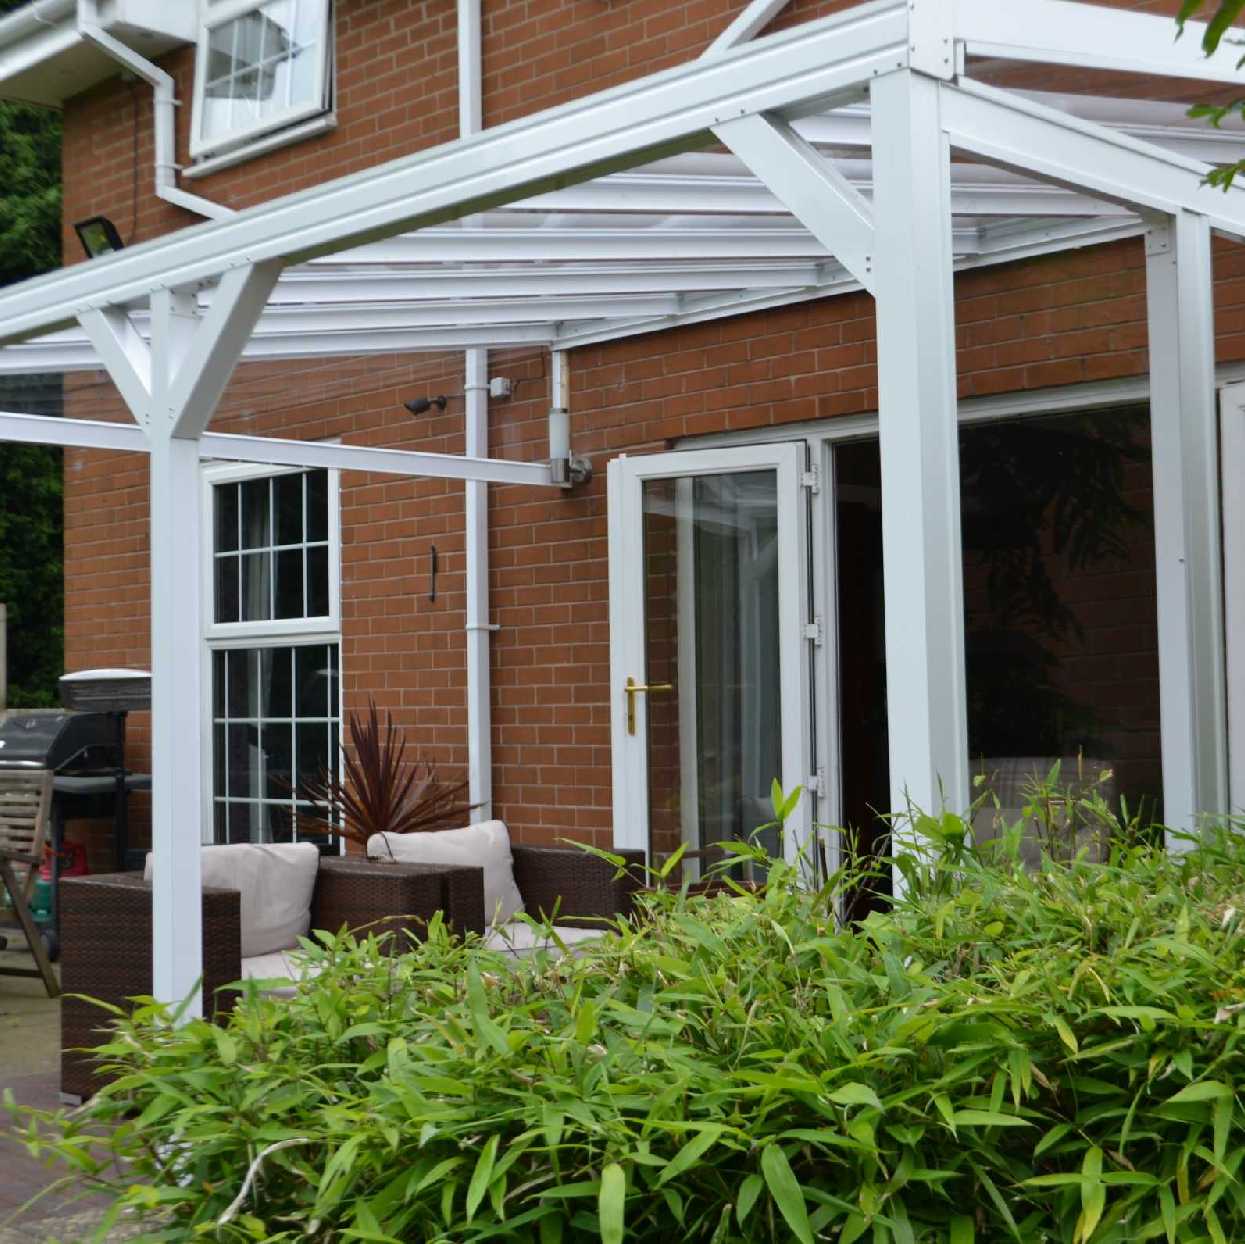 Omega Smart Lean-To Canopy, White with 6mm Glass Clear Plate Polycarbonate Glazing - 9.1m (W) x 2.5m (P), (5) Supporting Posts from Omega Build